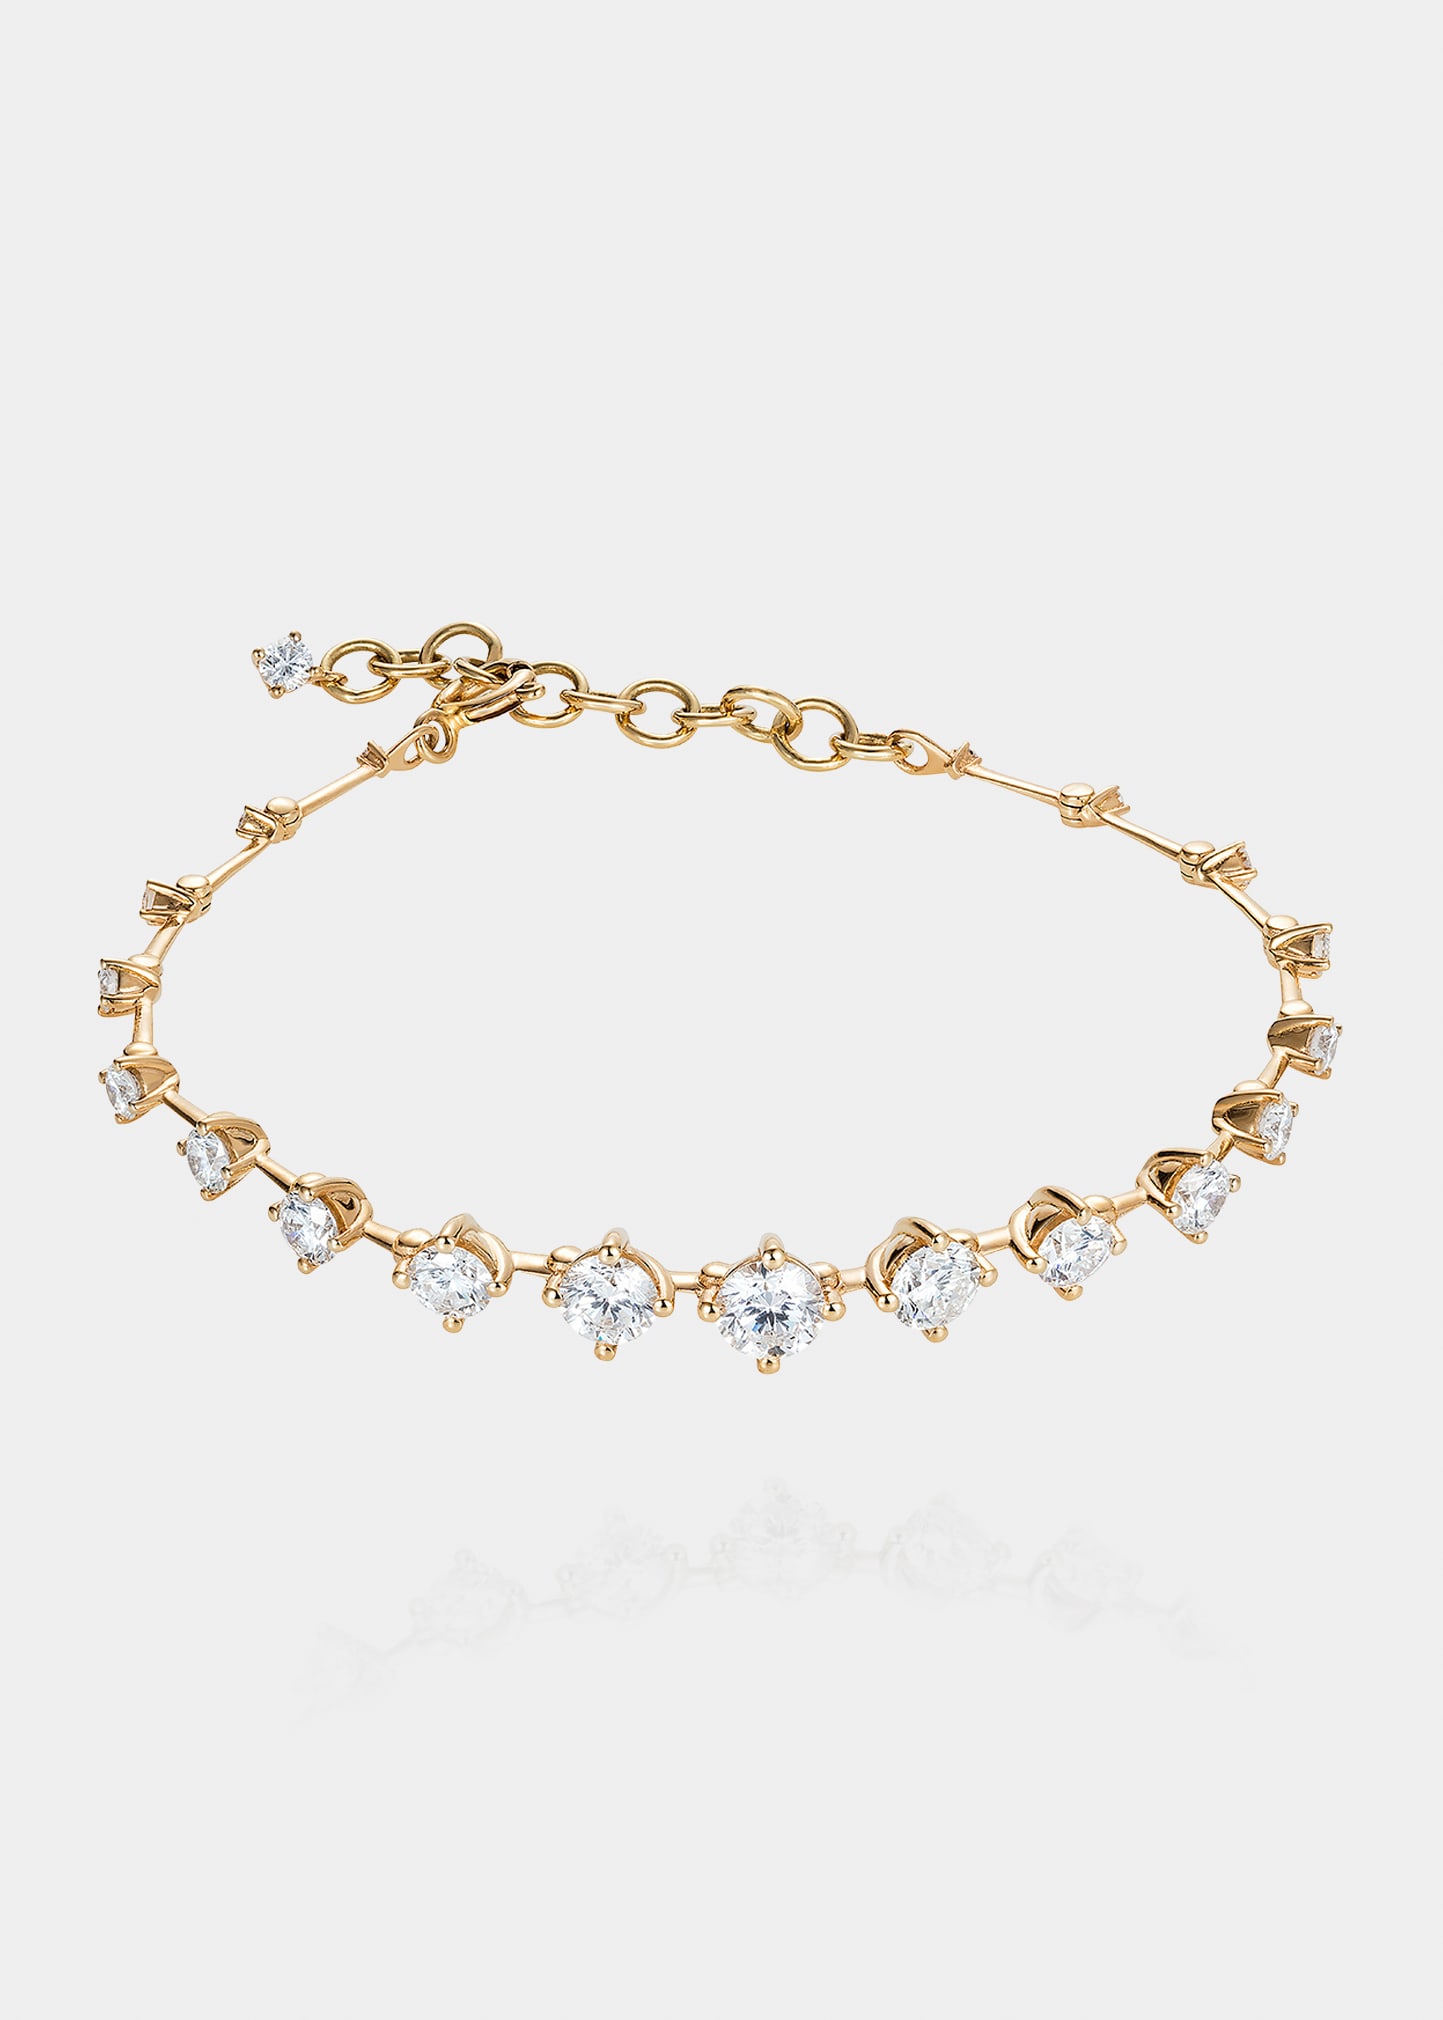 FERNANDO JORGE SEQUENCE BRACELET IN YELLOW GOLD AND DIAMONDS